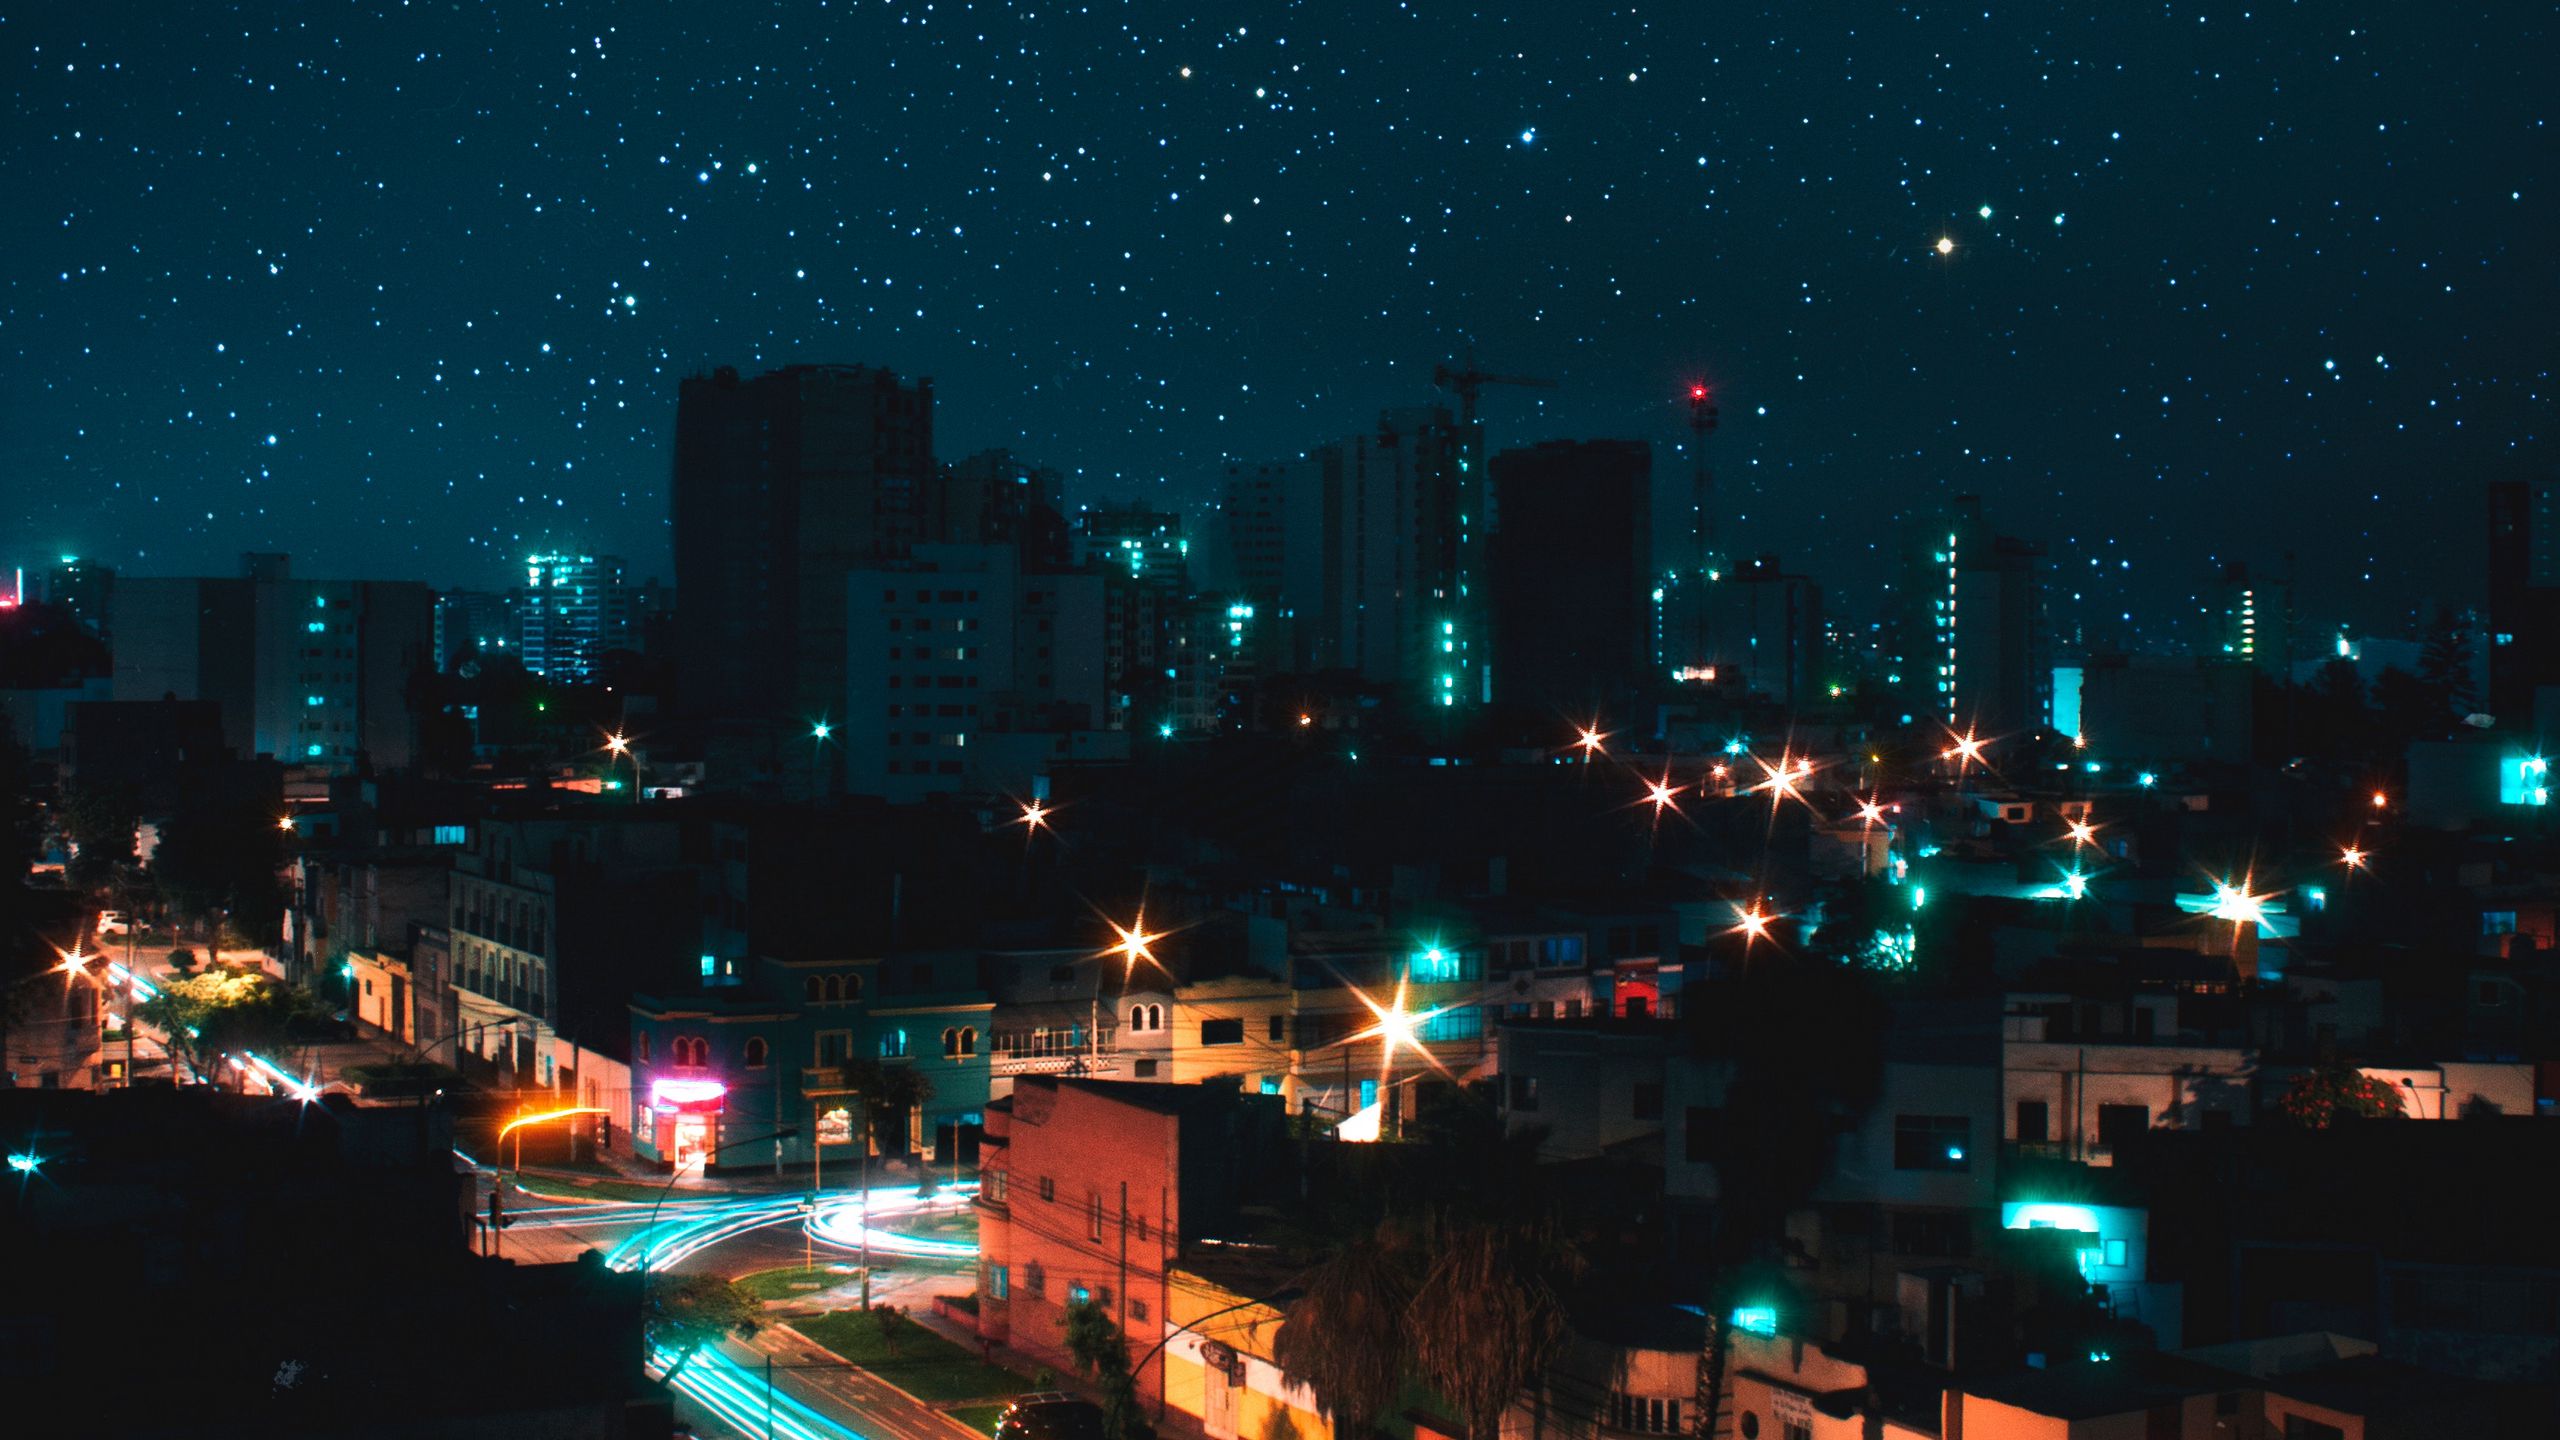 Download Wallpaper 2560x1440 Night City View From Above Starry Sky Buildings Widescreen 16 9 Hd Background